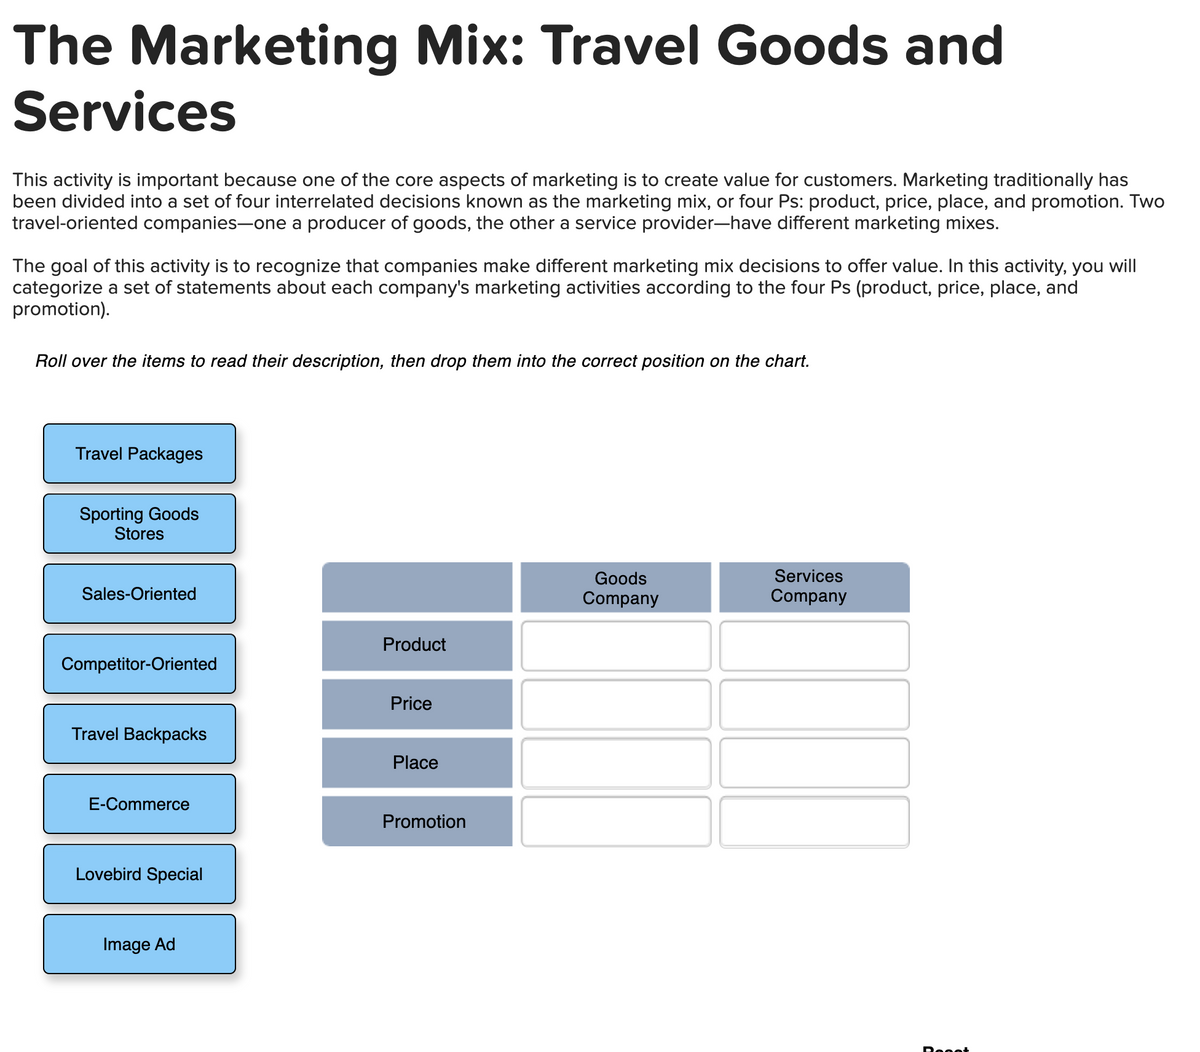 The Marketing Mix: Travel Goods and
Services
This activity is important because one of the core aspects of marketing is to create value for customers. Marketing traditionally has
been divided into a set of four interrelated decisions known as the marketing mix, or four Ps: product, price, place, and promotion. Two
travel-oriented companies-one a producer of goods, the other a service provider-have different marketing mixes.
The goal of this activity is to recognize that companies make different marketing mix decisions to offer value. In this activity, you will
categorize a set of statements about each company's marketing activities according to the four Ps (product, price, place, and
promotion).
Roll over the items to read their description, then drop them into the correct position on the chart.
Travel Packages
Sporting Goods
Stores
Sales-Oriented
Competitor-Oriented
Travel Backpacks
E-Commerce
Lovebird Special
Image Ad
Product
Price
Place
Promotion
Goods
Company
Services
Company